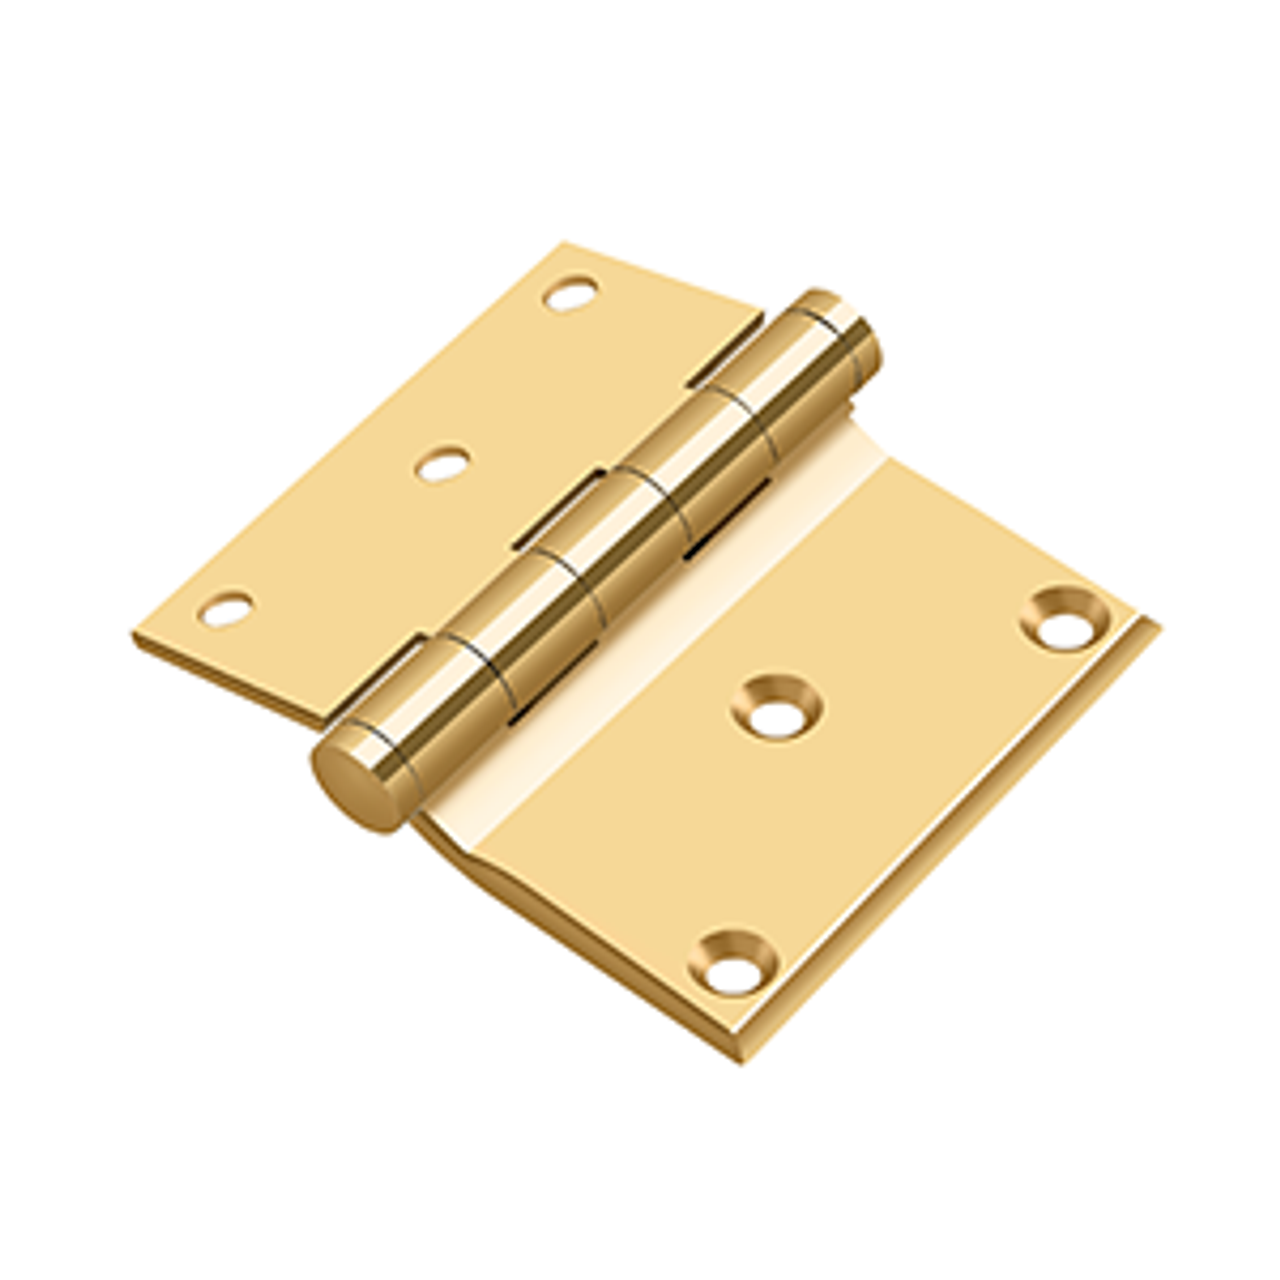 Solid Brass Olive Knuckle Hinges Collection - Solid Brass 2 1/2 x